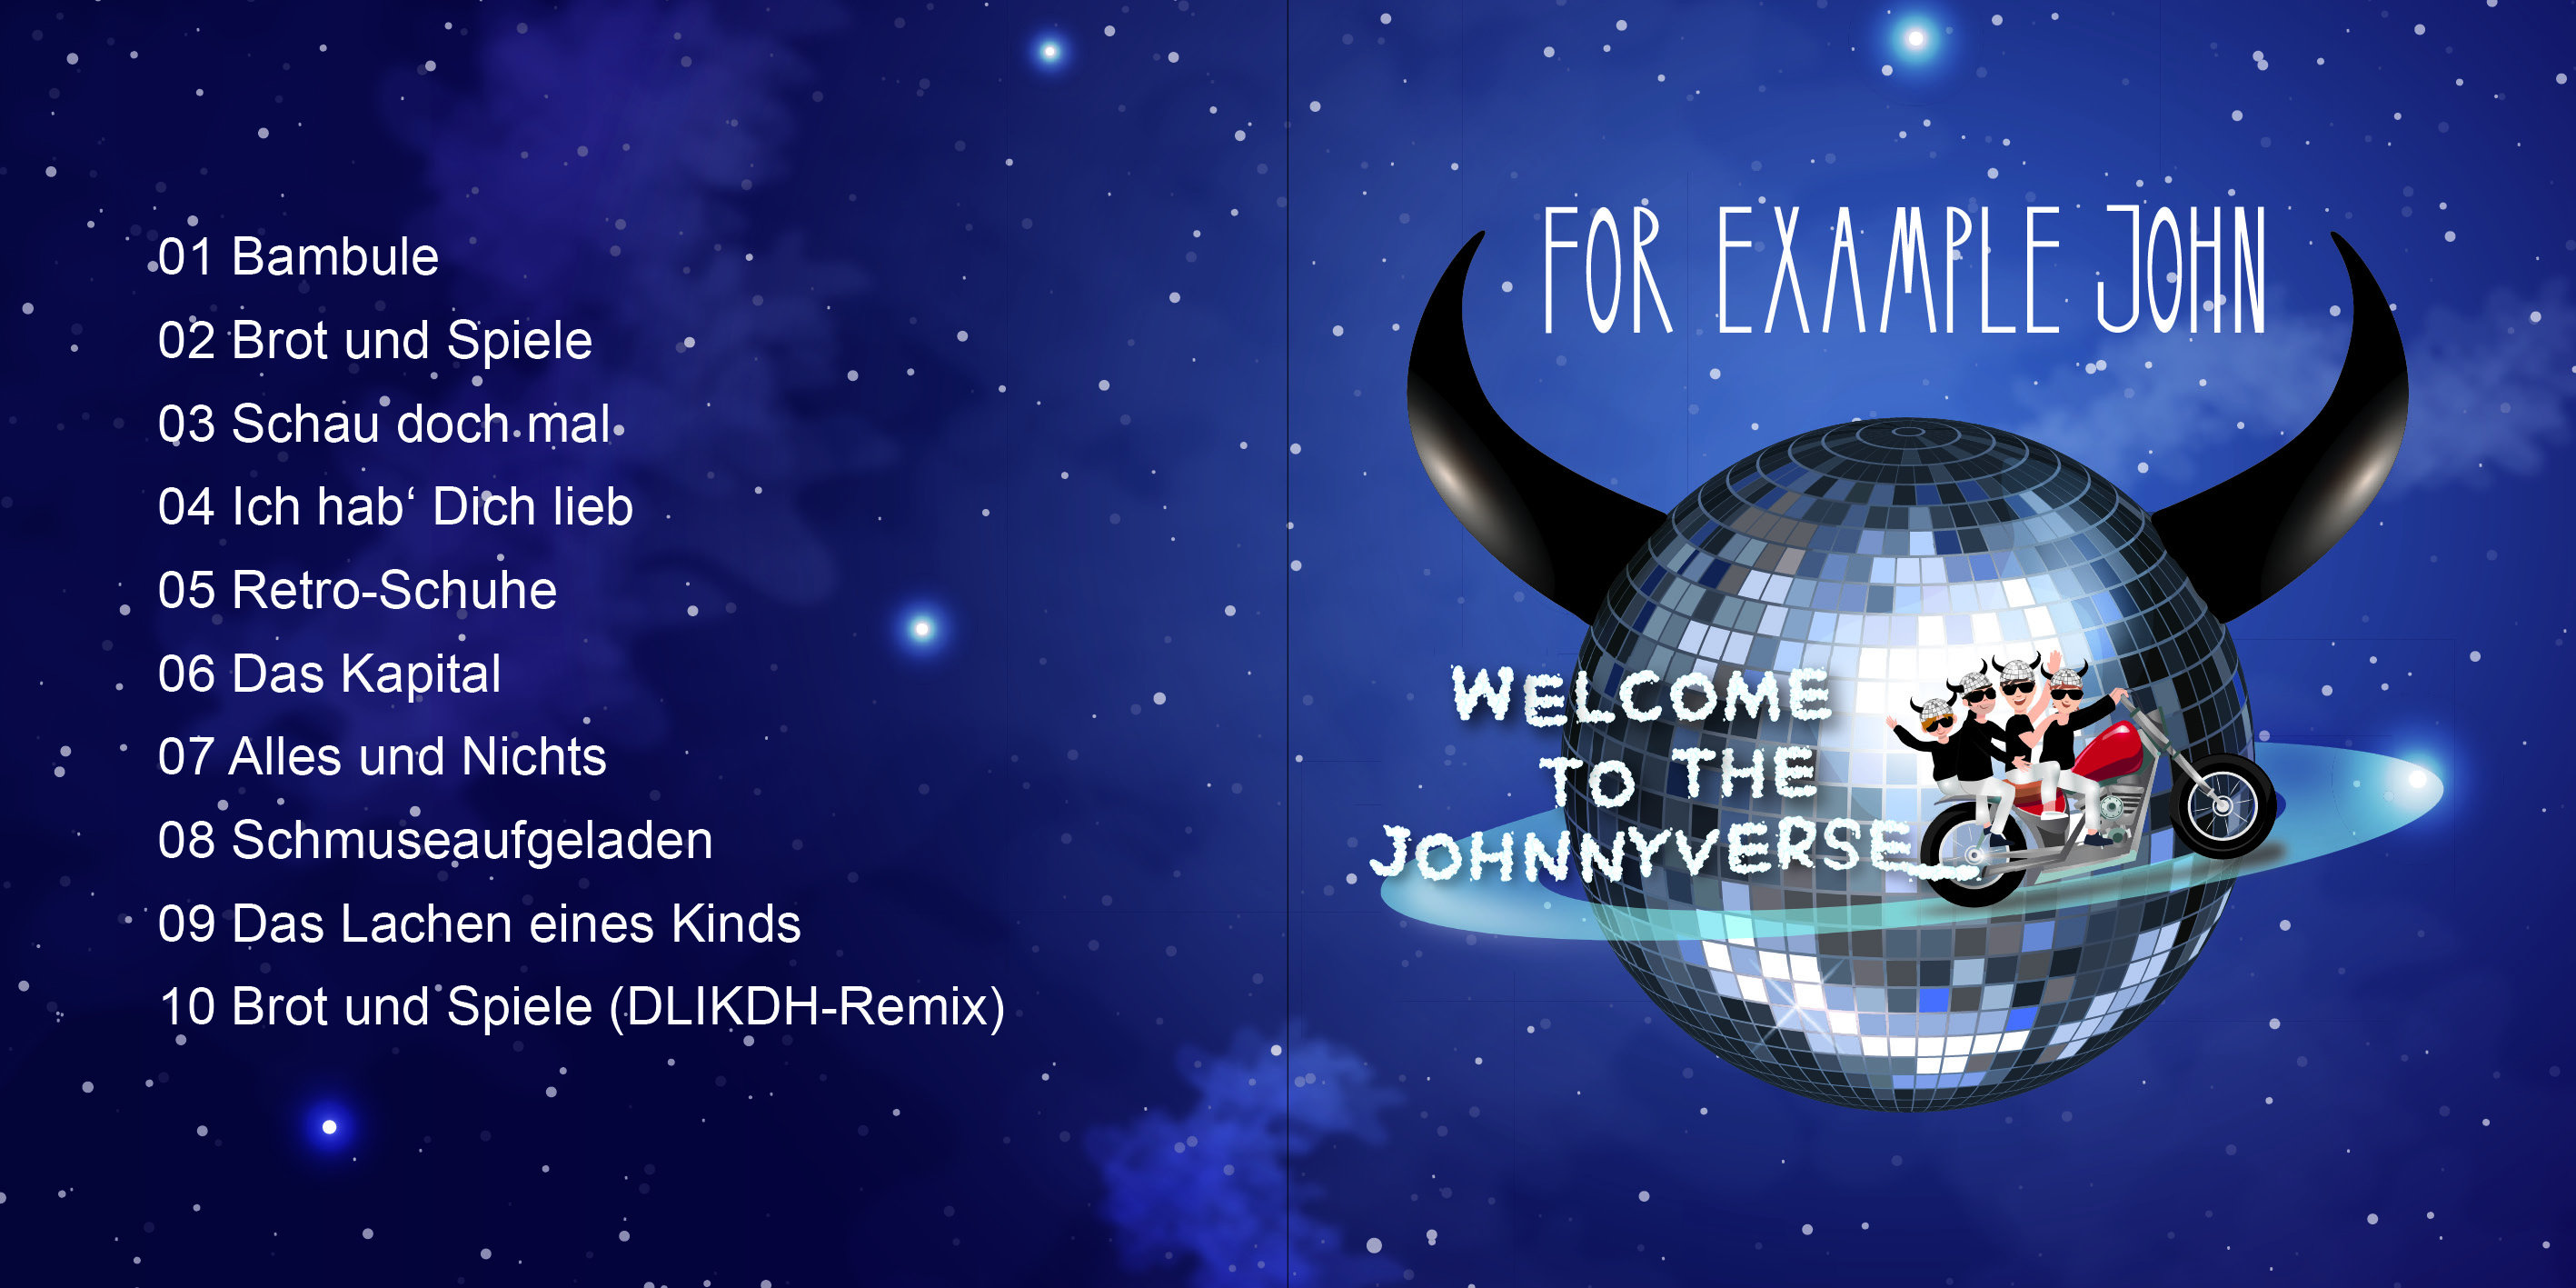 For Example John – Welcome to the Johnnverse